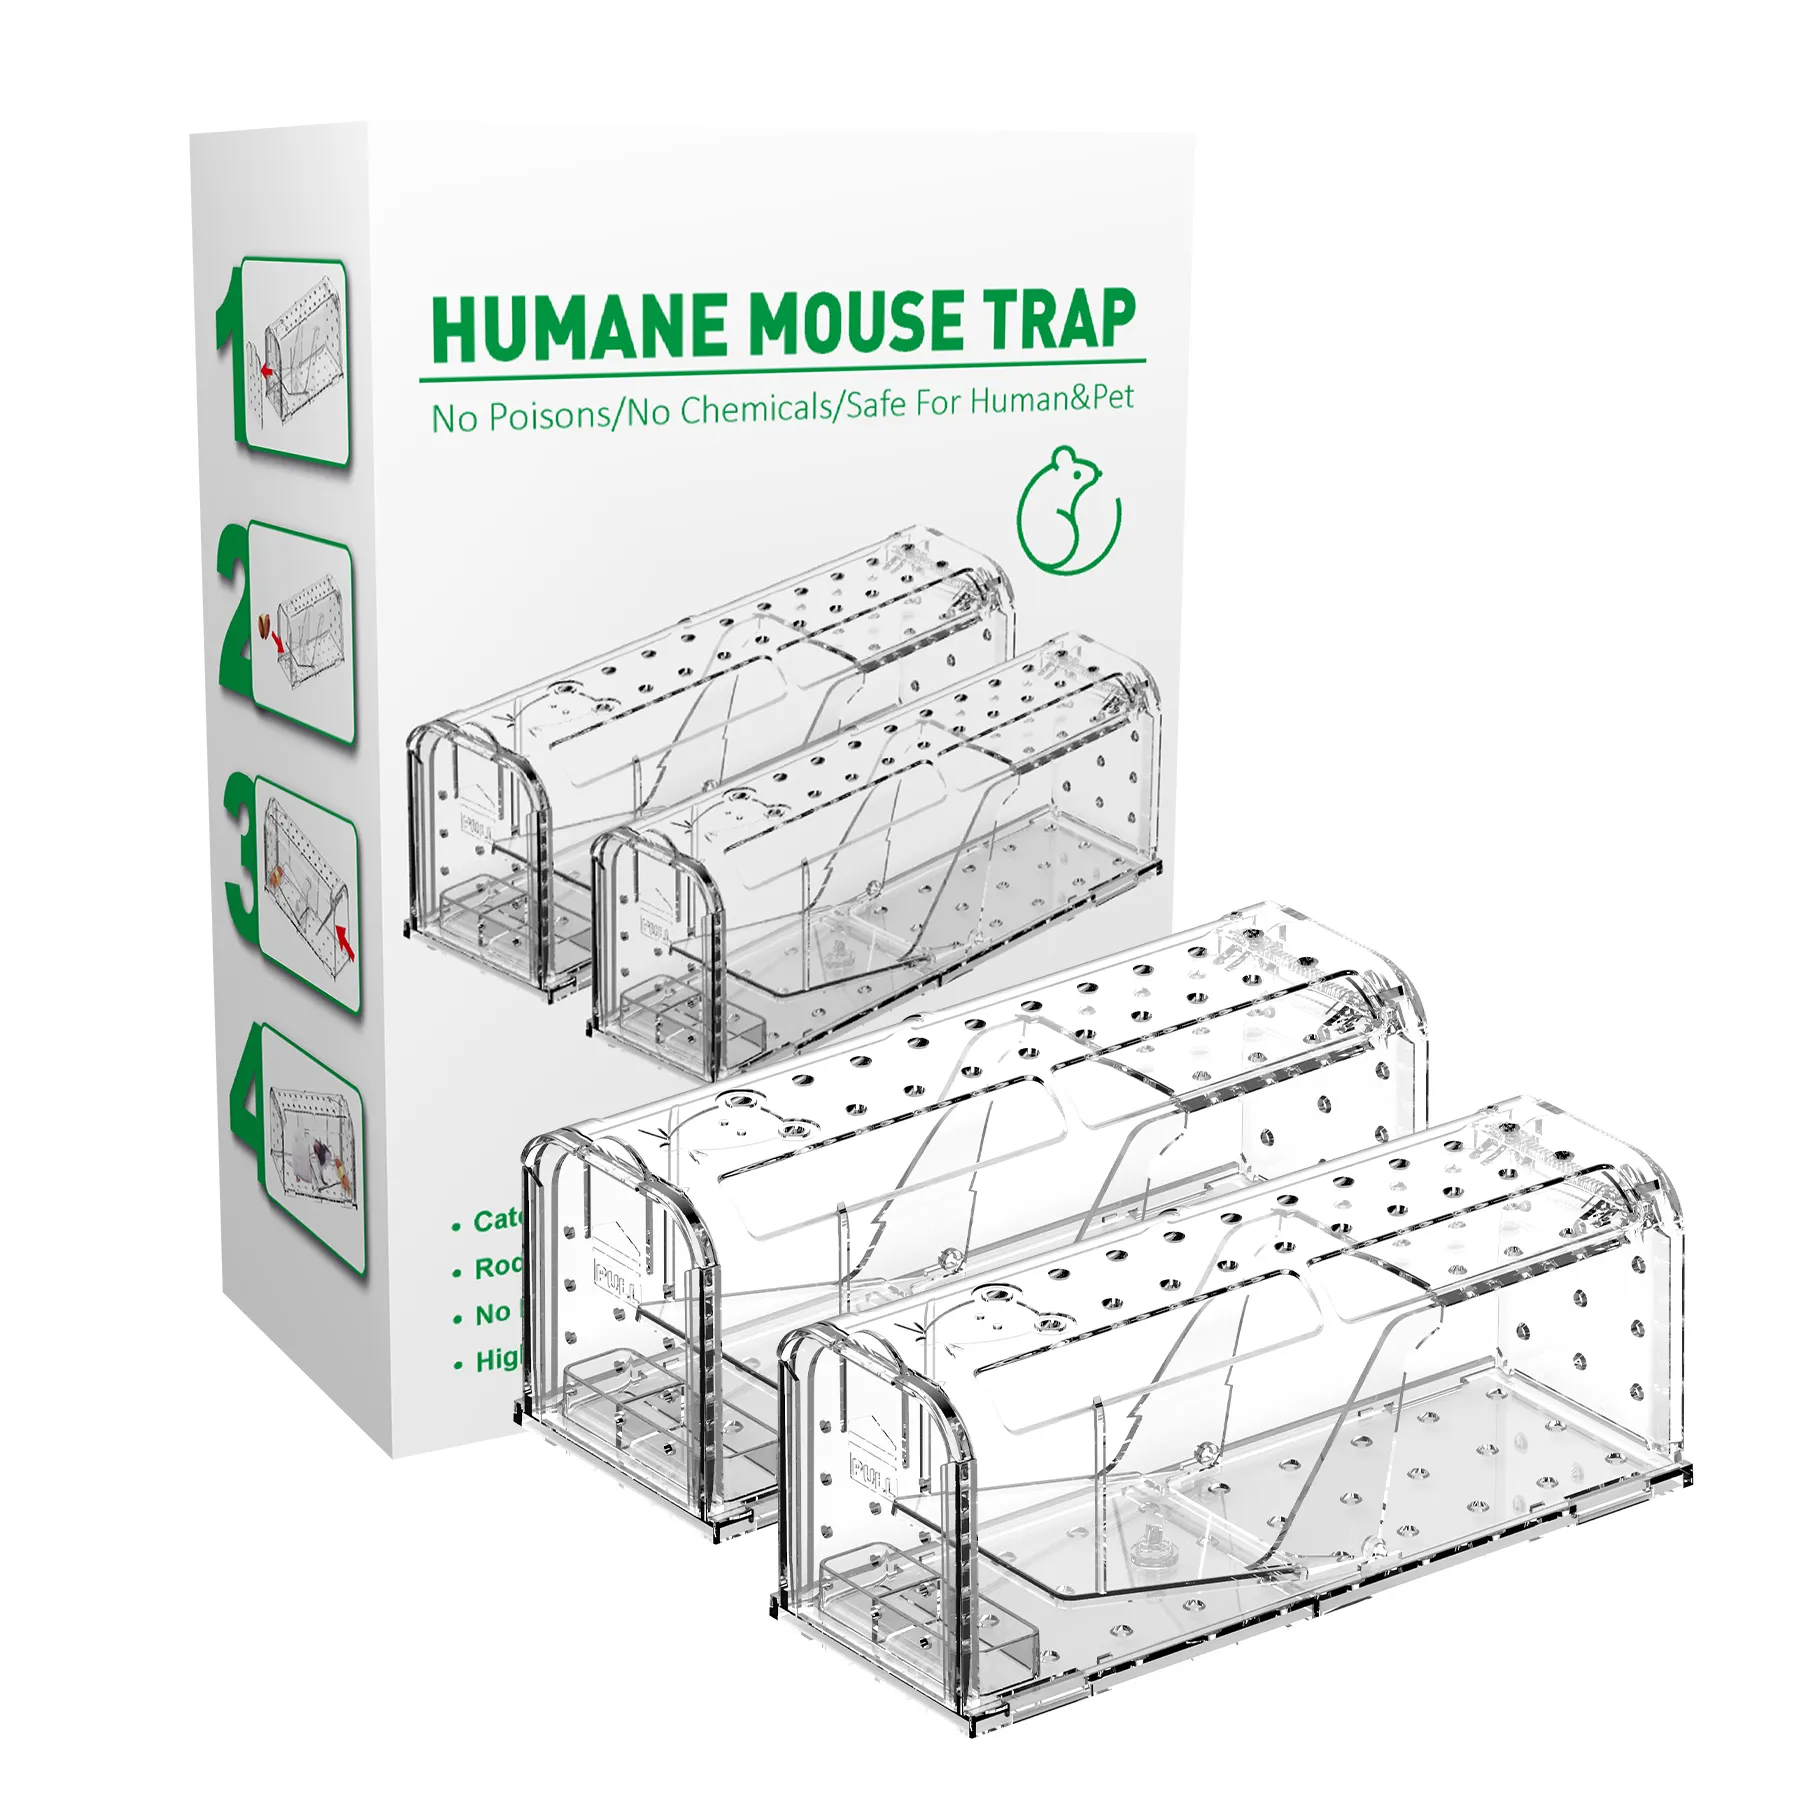 Hot Sell Humane Mouse Trap Smart Mouse Traps No Kill Pest Control Rodent Mice Rats Trap